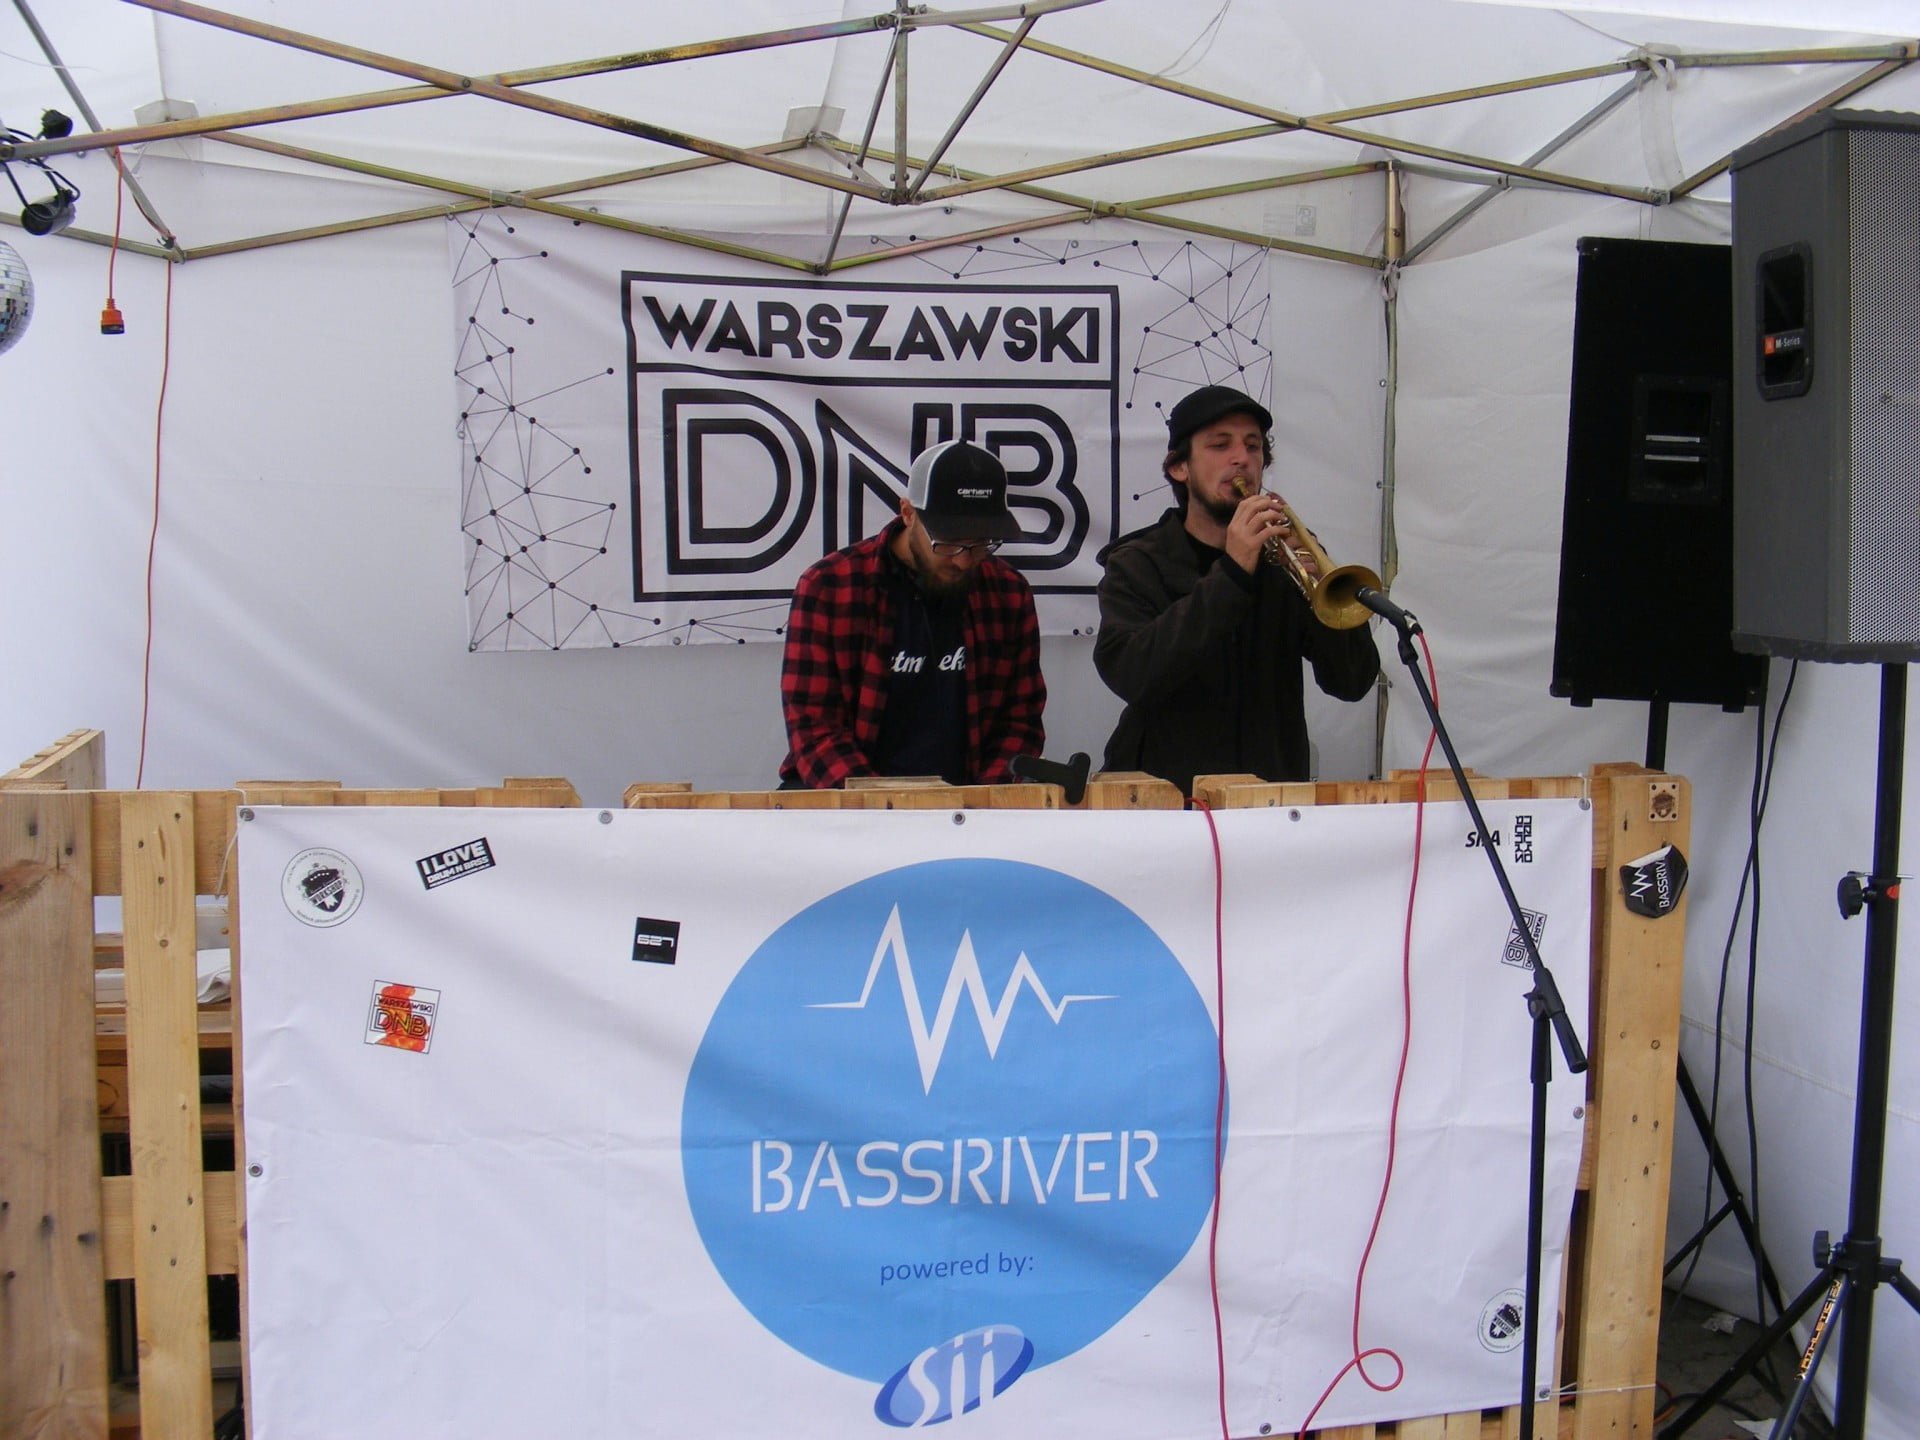 BassRiver powered by Sii 16